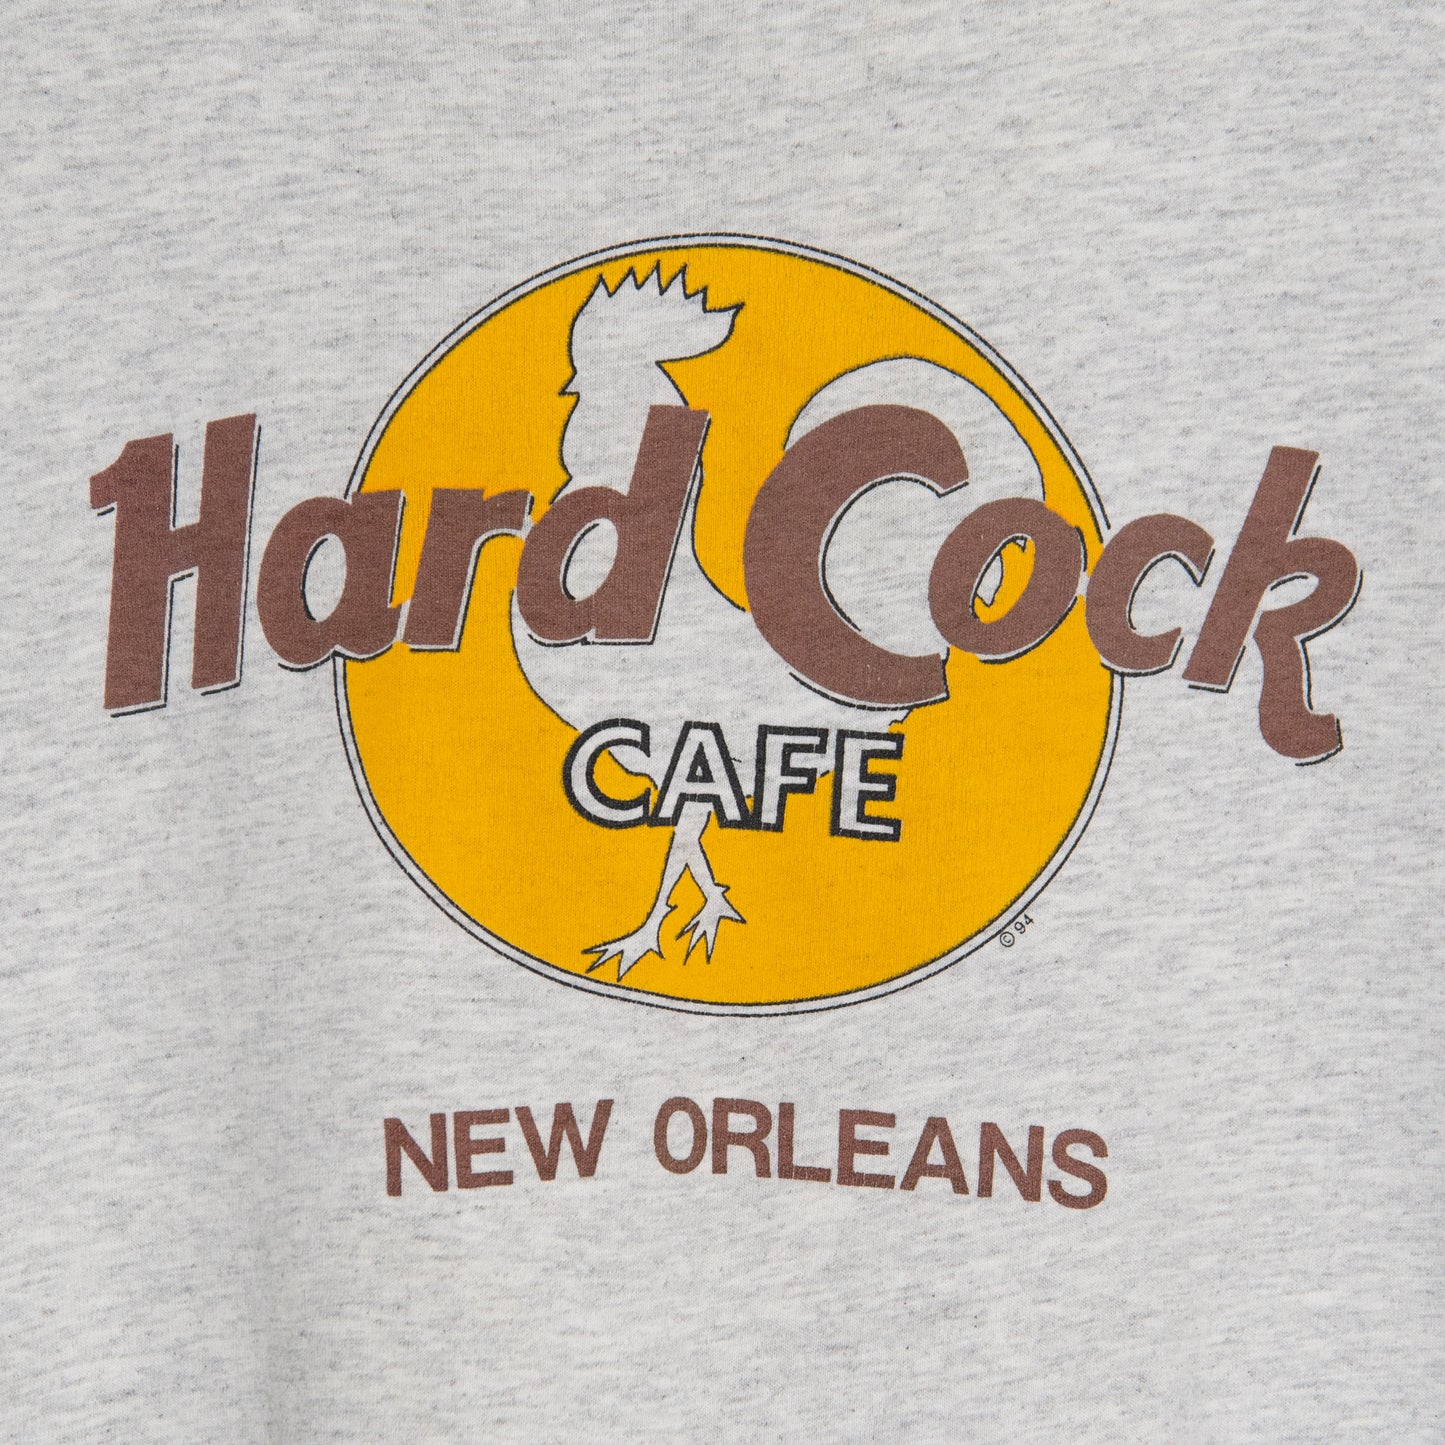 90s Hard Cock Cafe 'New Orleans' T-Shirt XL